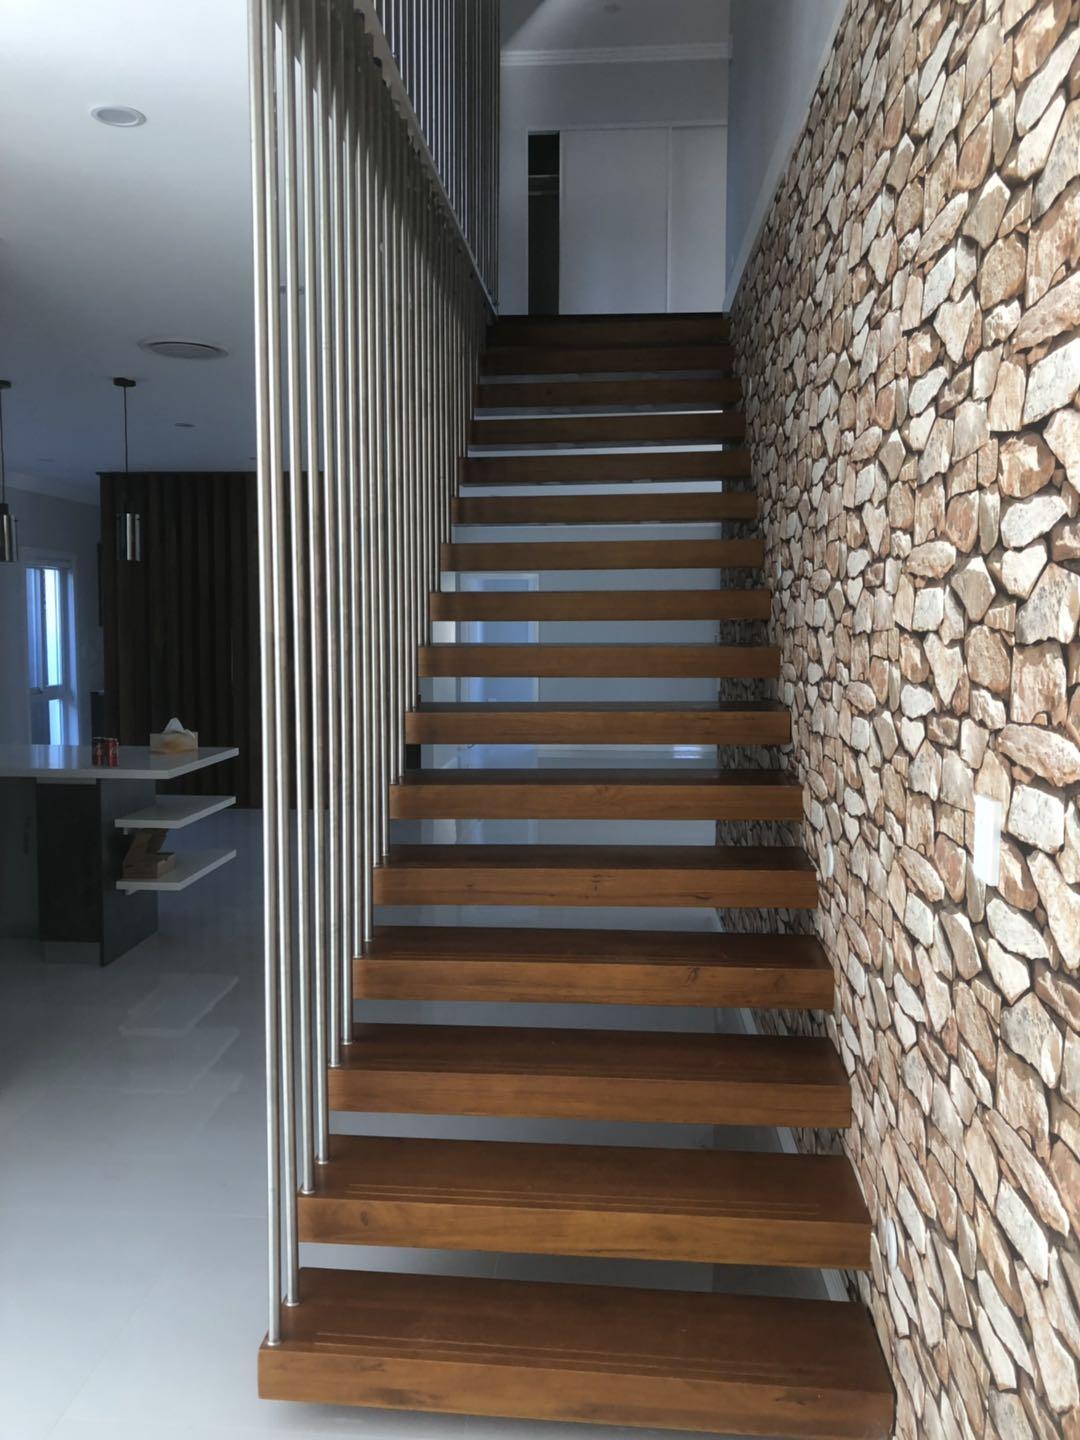 YUDI Stairs floating stairs design vendor for apartment